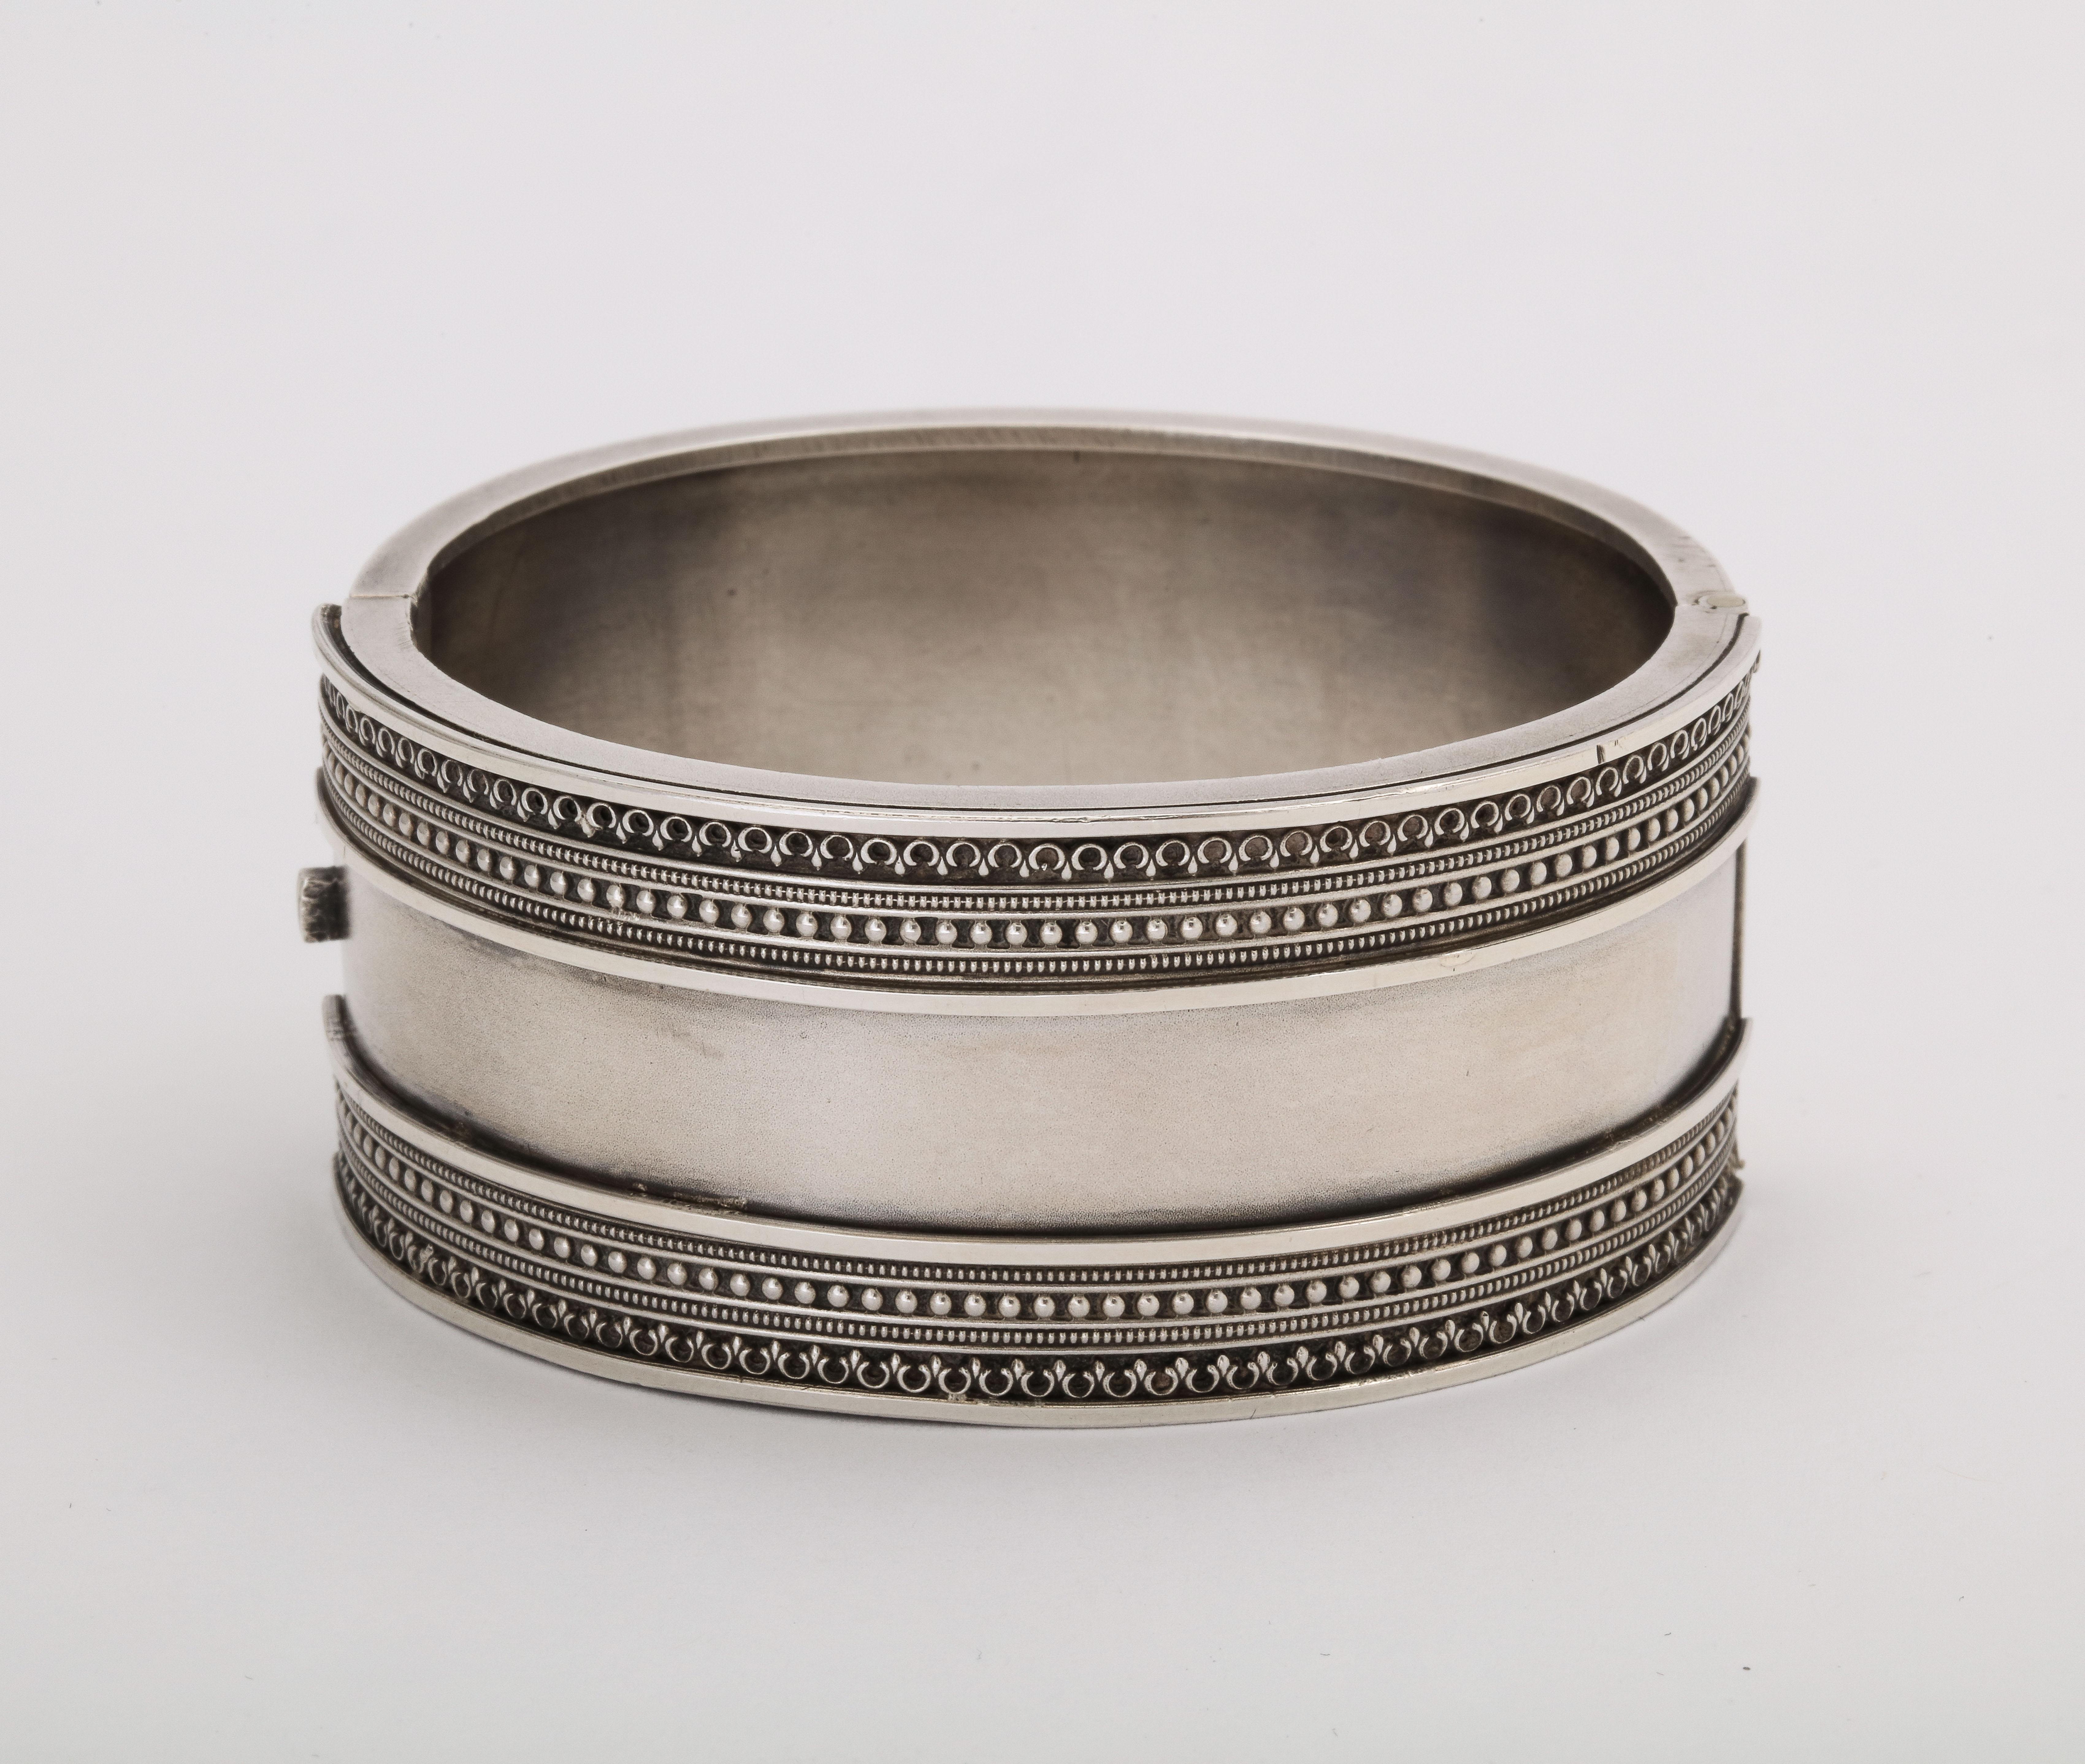 Victorian Silver bloomed in popularity from 1860-1880 and this elegant, unscathed cuff was made during that period. The center of this cuff is plain with no scratch or dent and that plainness contrasts with the embellished architecural patterns top